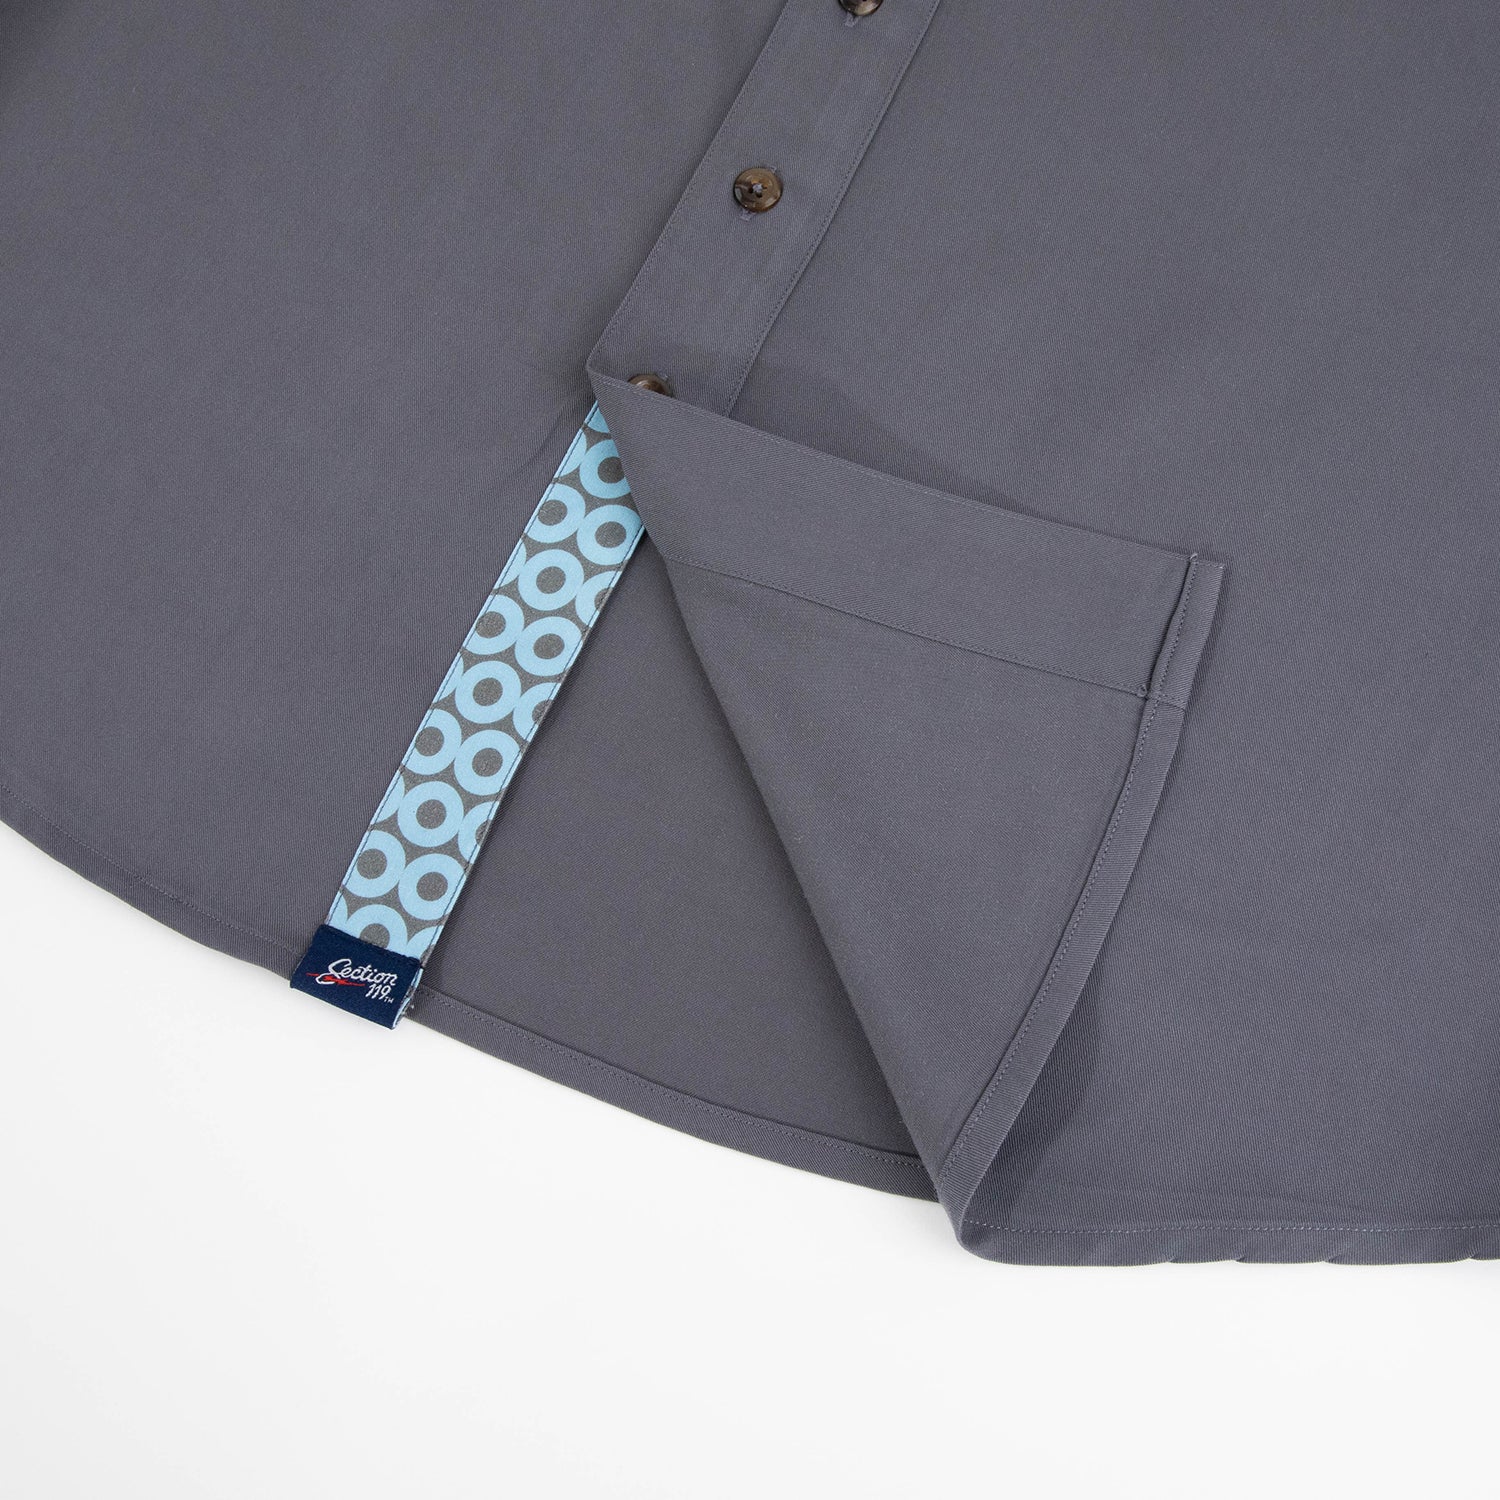 Phish Relaxed Short Sleeve Button Down Teal Donut in Grey - Section 119